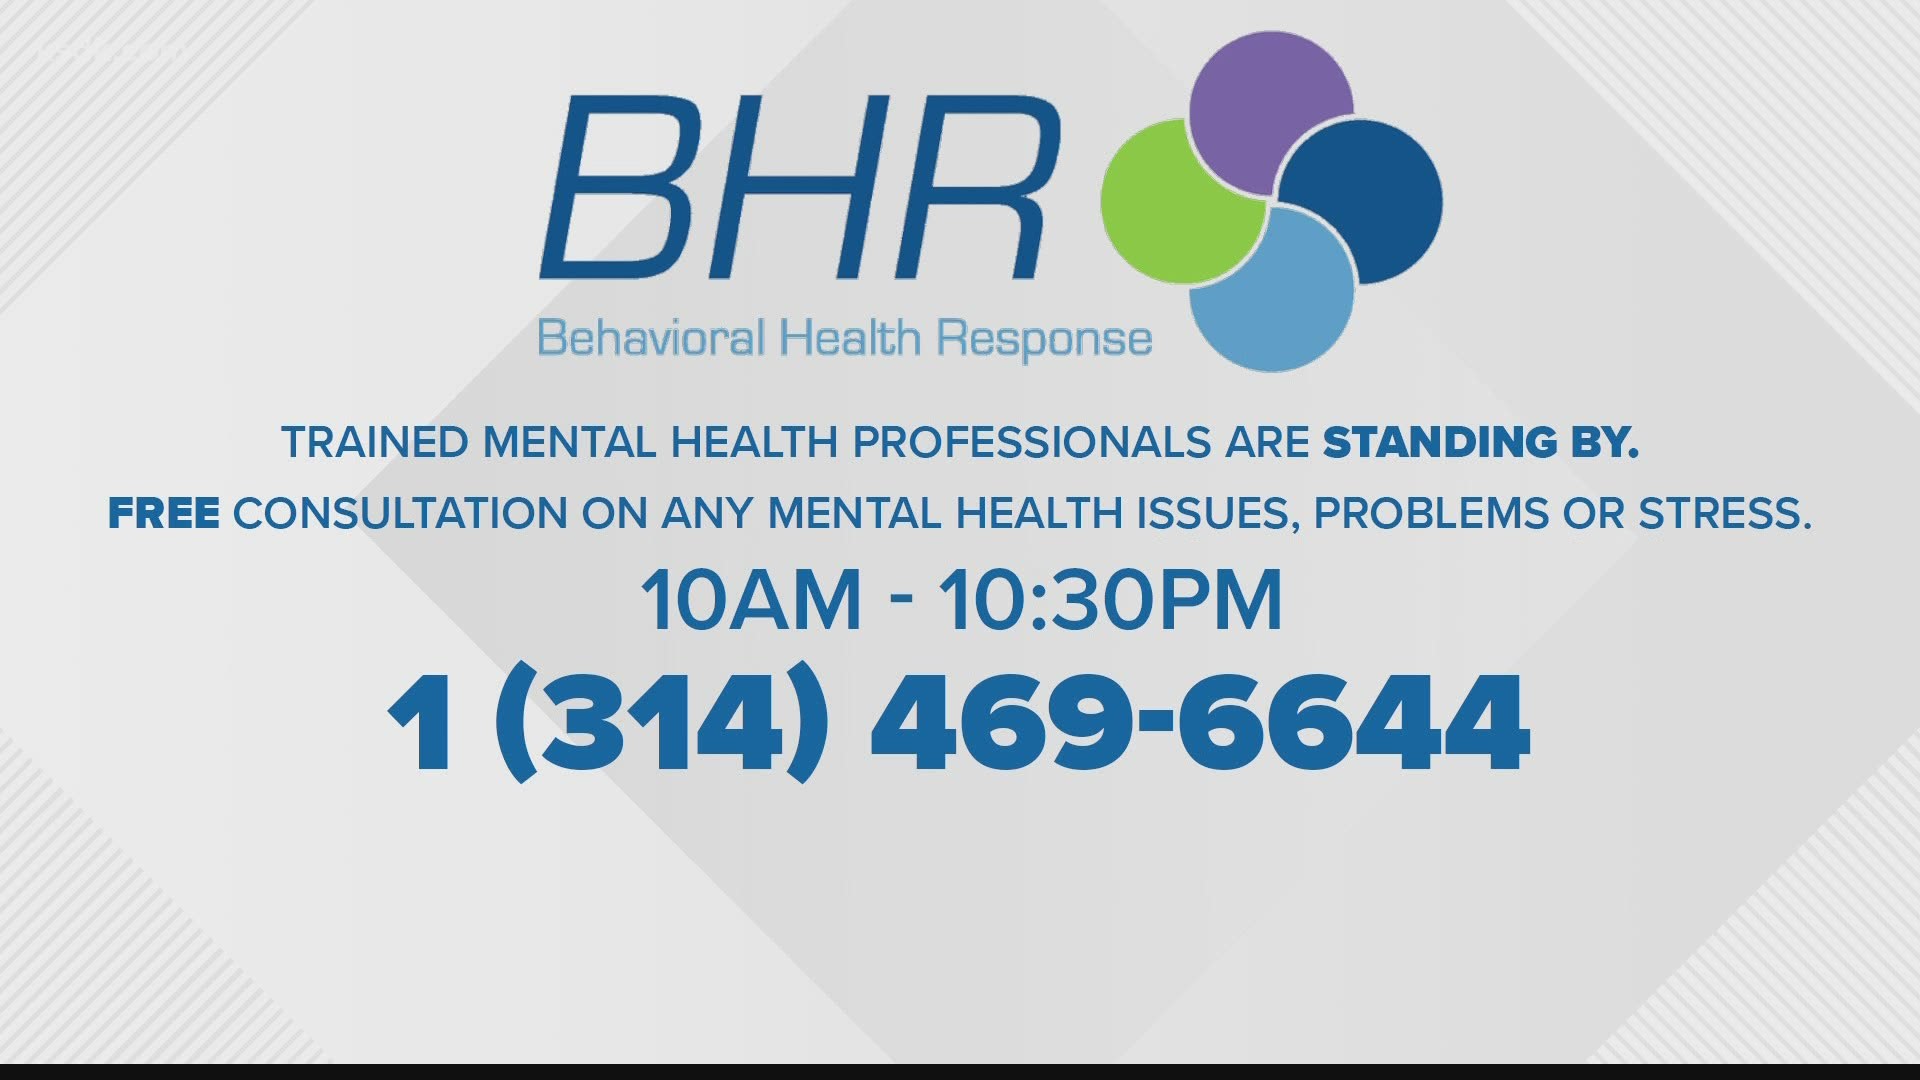 Call 314-469-6644 on Tuesday from 10 a.m. - 10:30 p.m. to speak with a trained mental health counselor